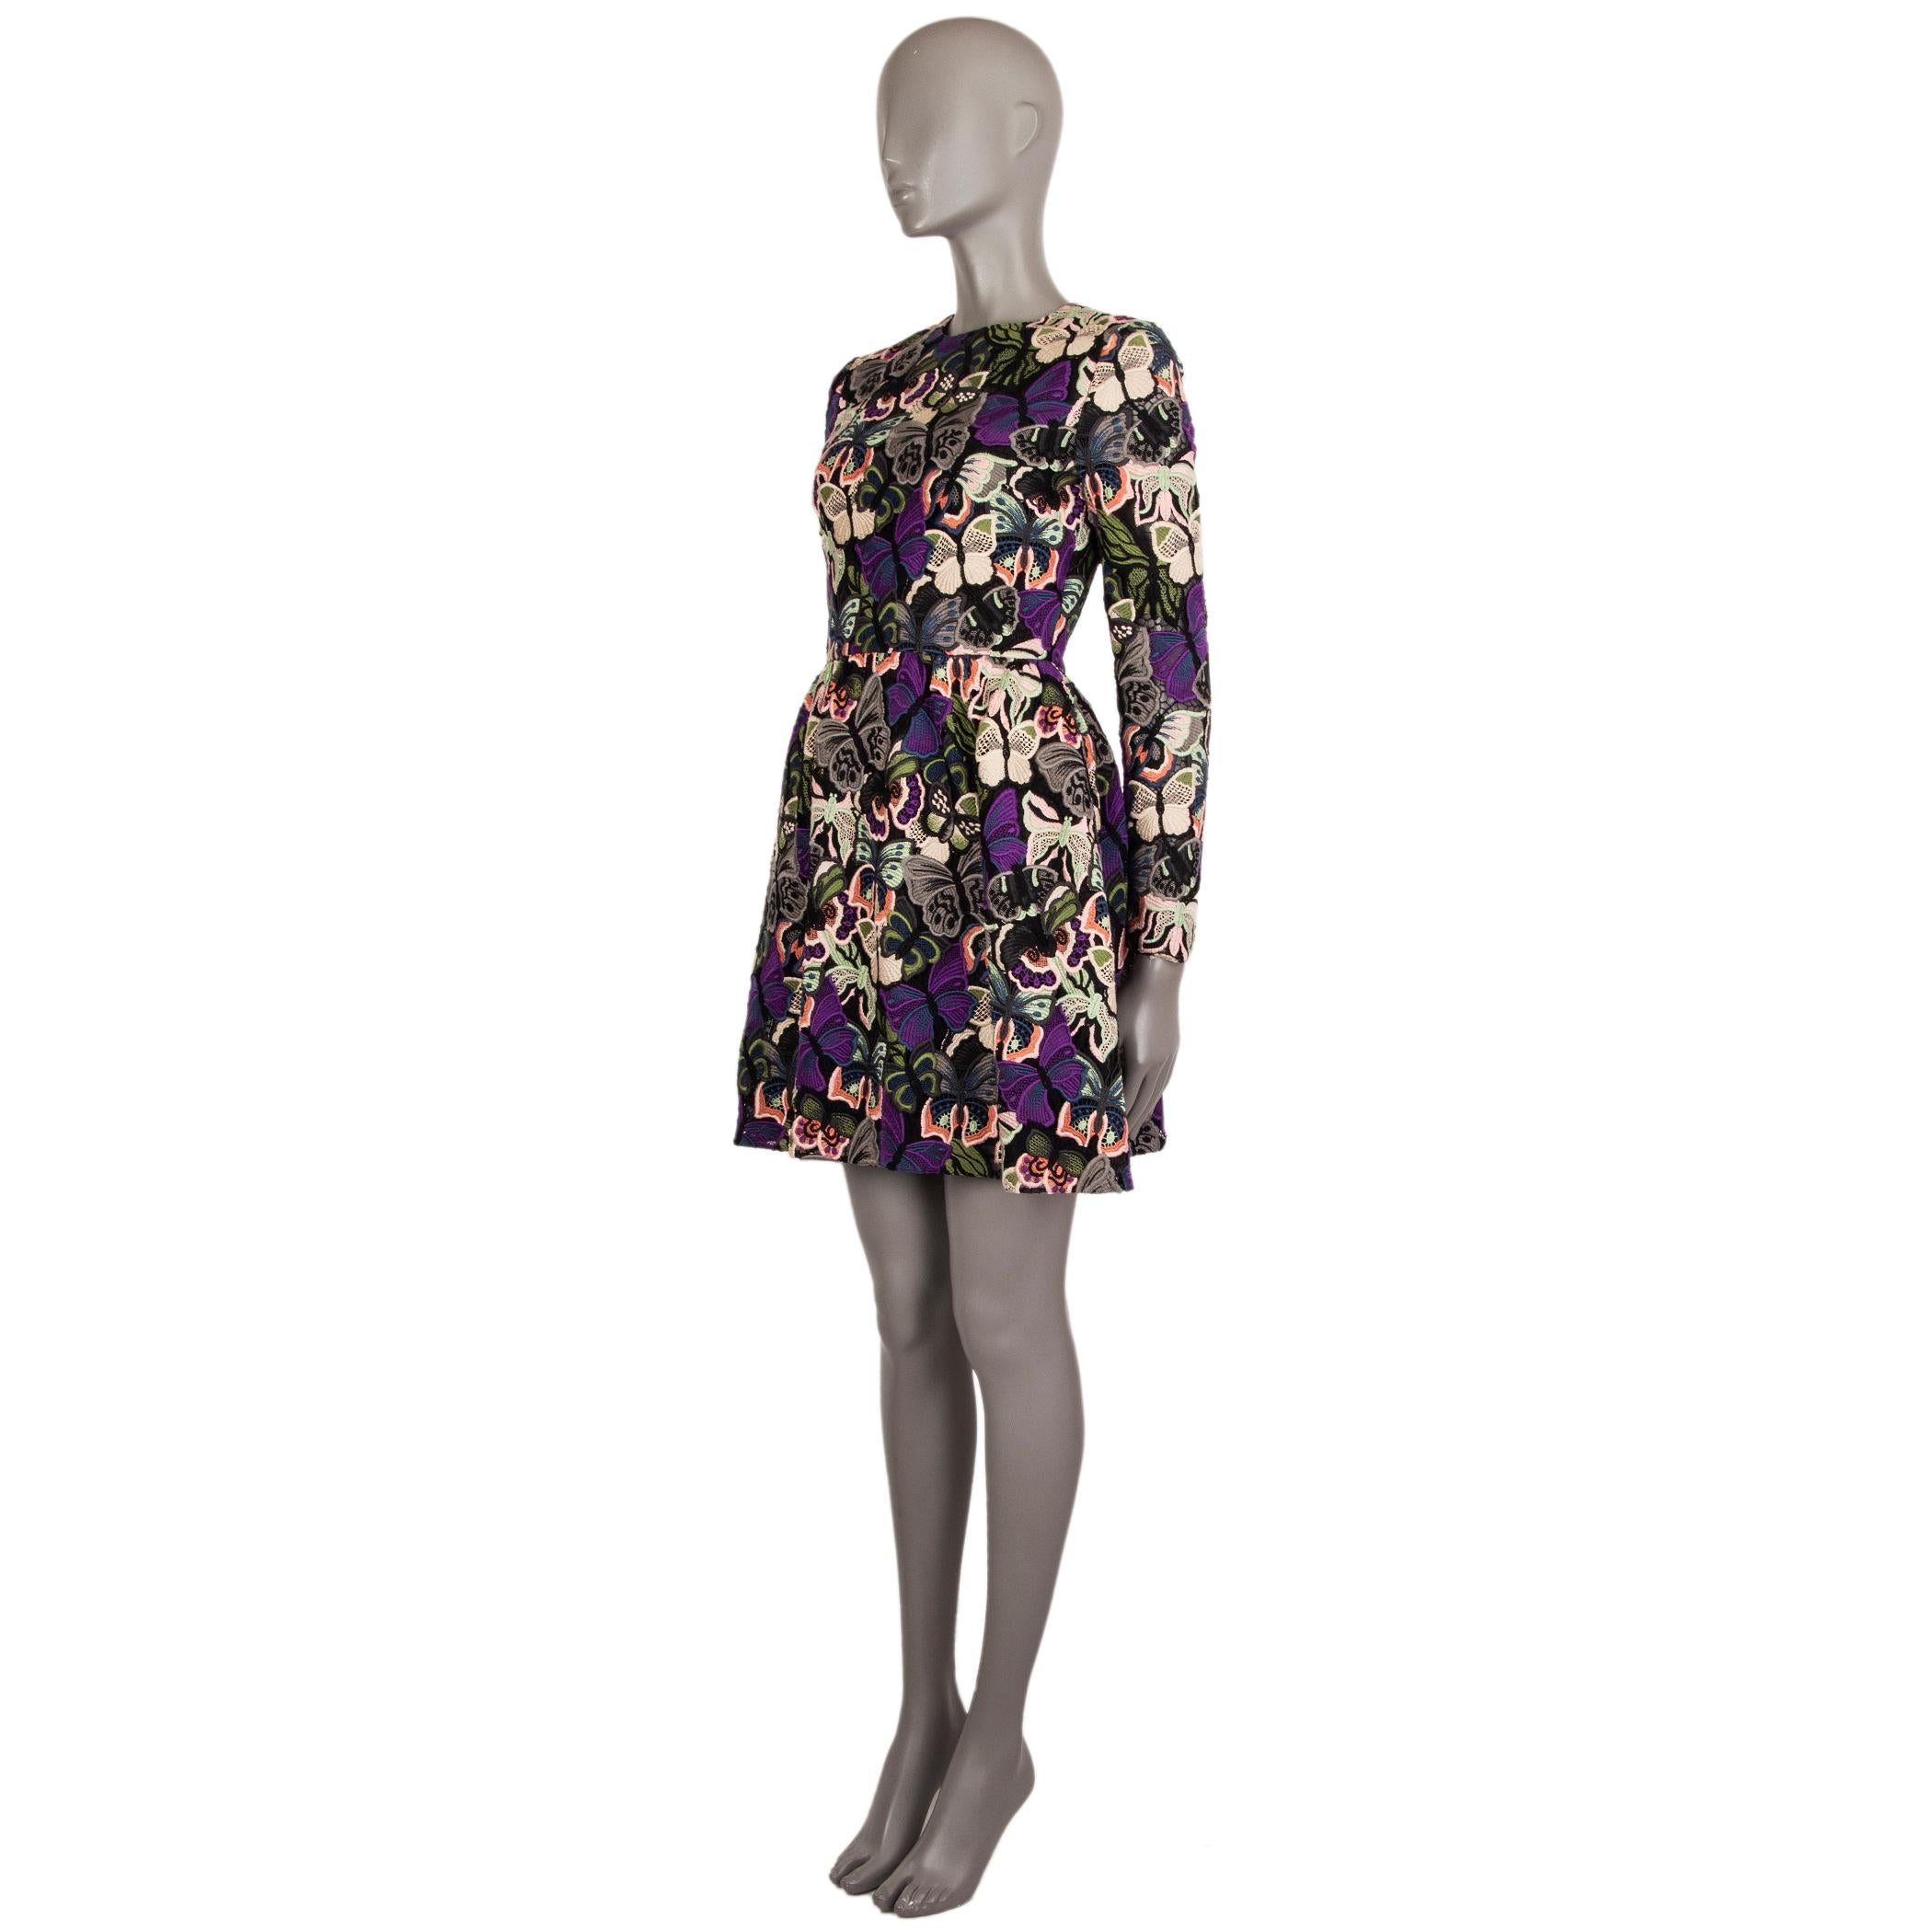 Valentino PF'14 butterfly-embroidered long-sleeve shift dress in black, purple, blue, green, grey,, mint, salmon, chartreuse, rose, and nude cotton (100%), nylon (100%), and silk (100%). With gathered skirt and two slit pockets on the sides. Lined